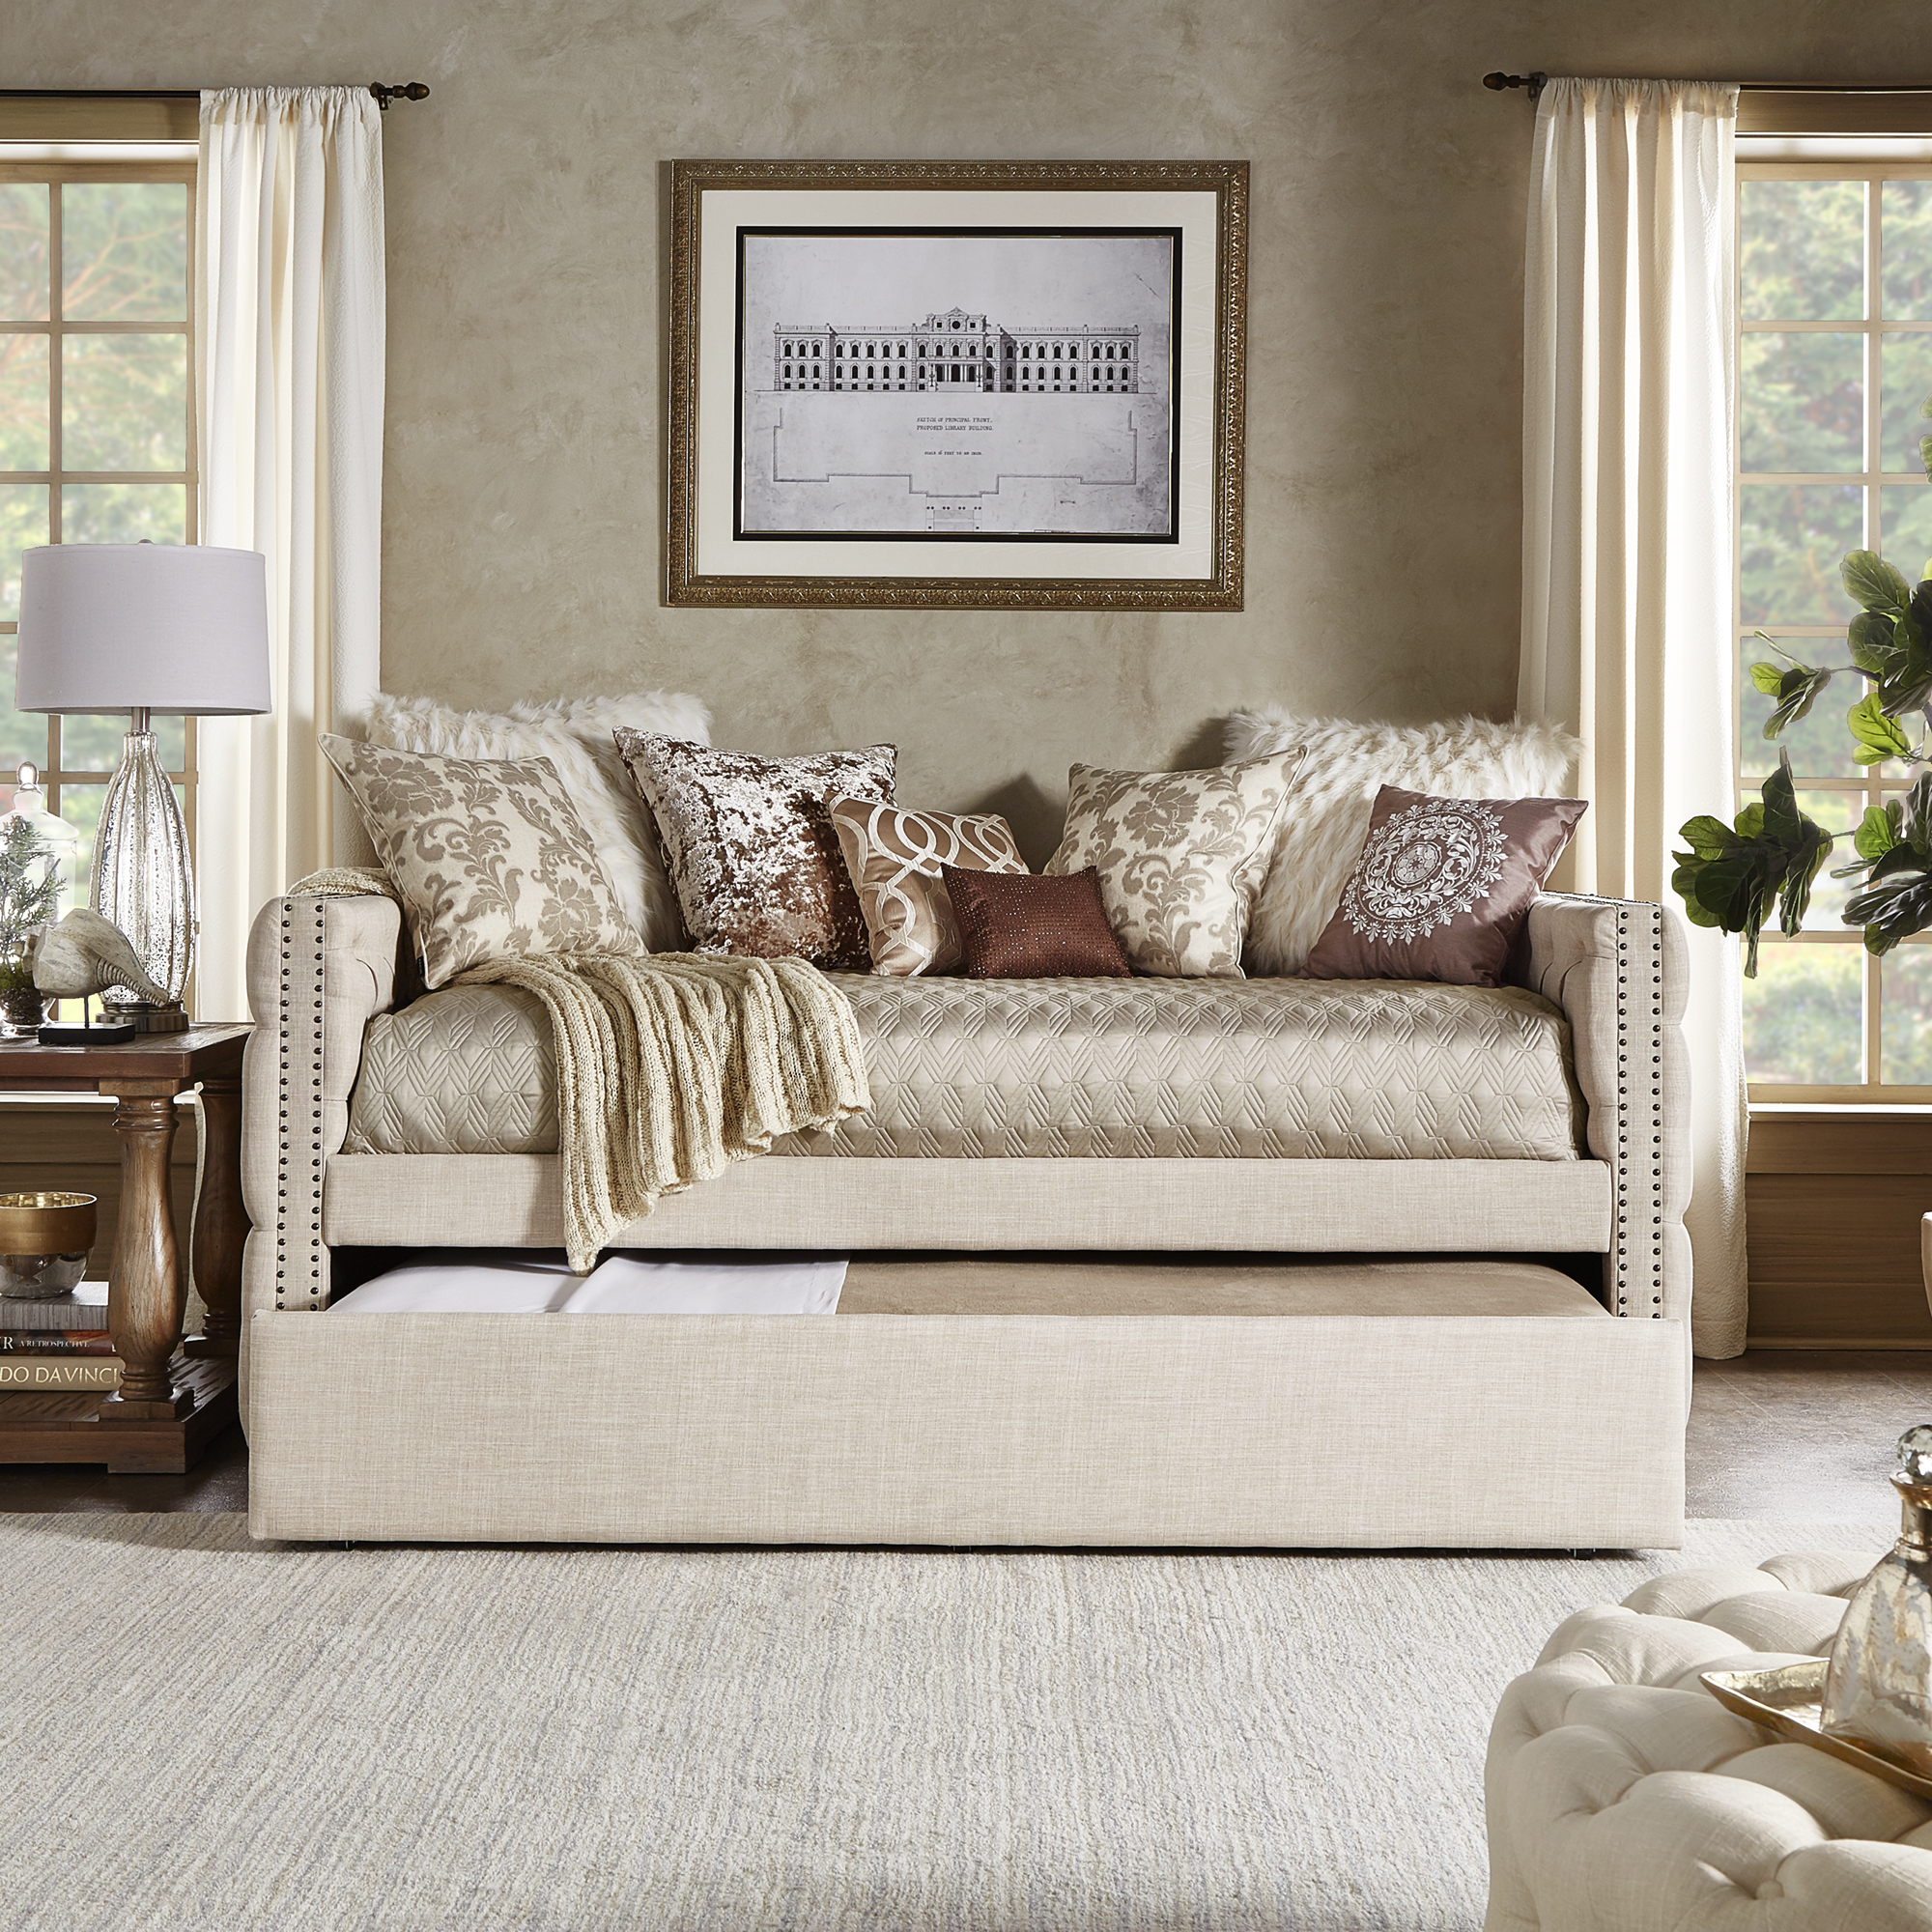 Tufted Nailhead Daybed